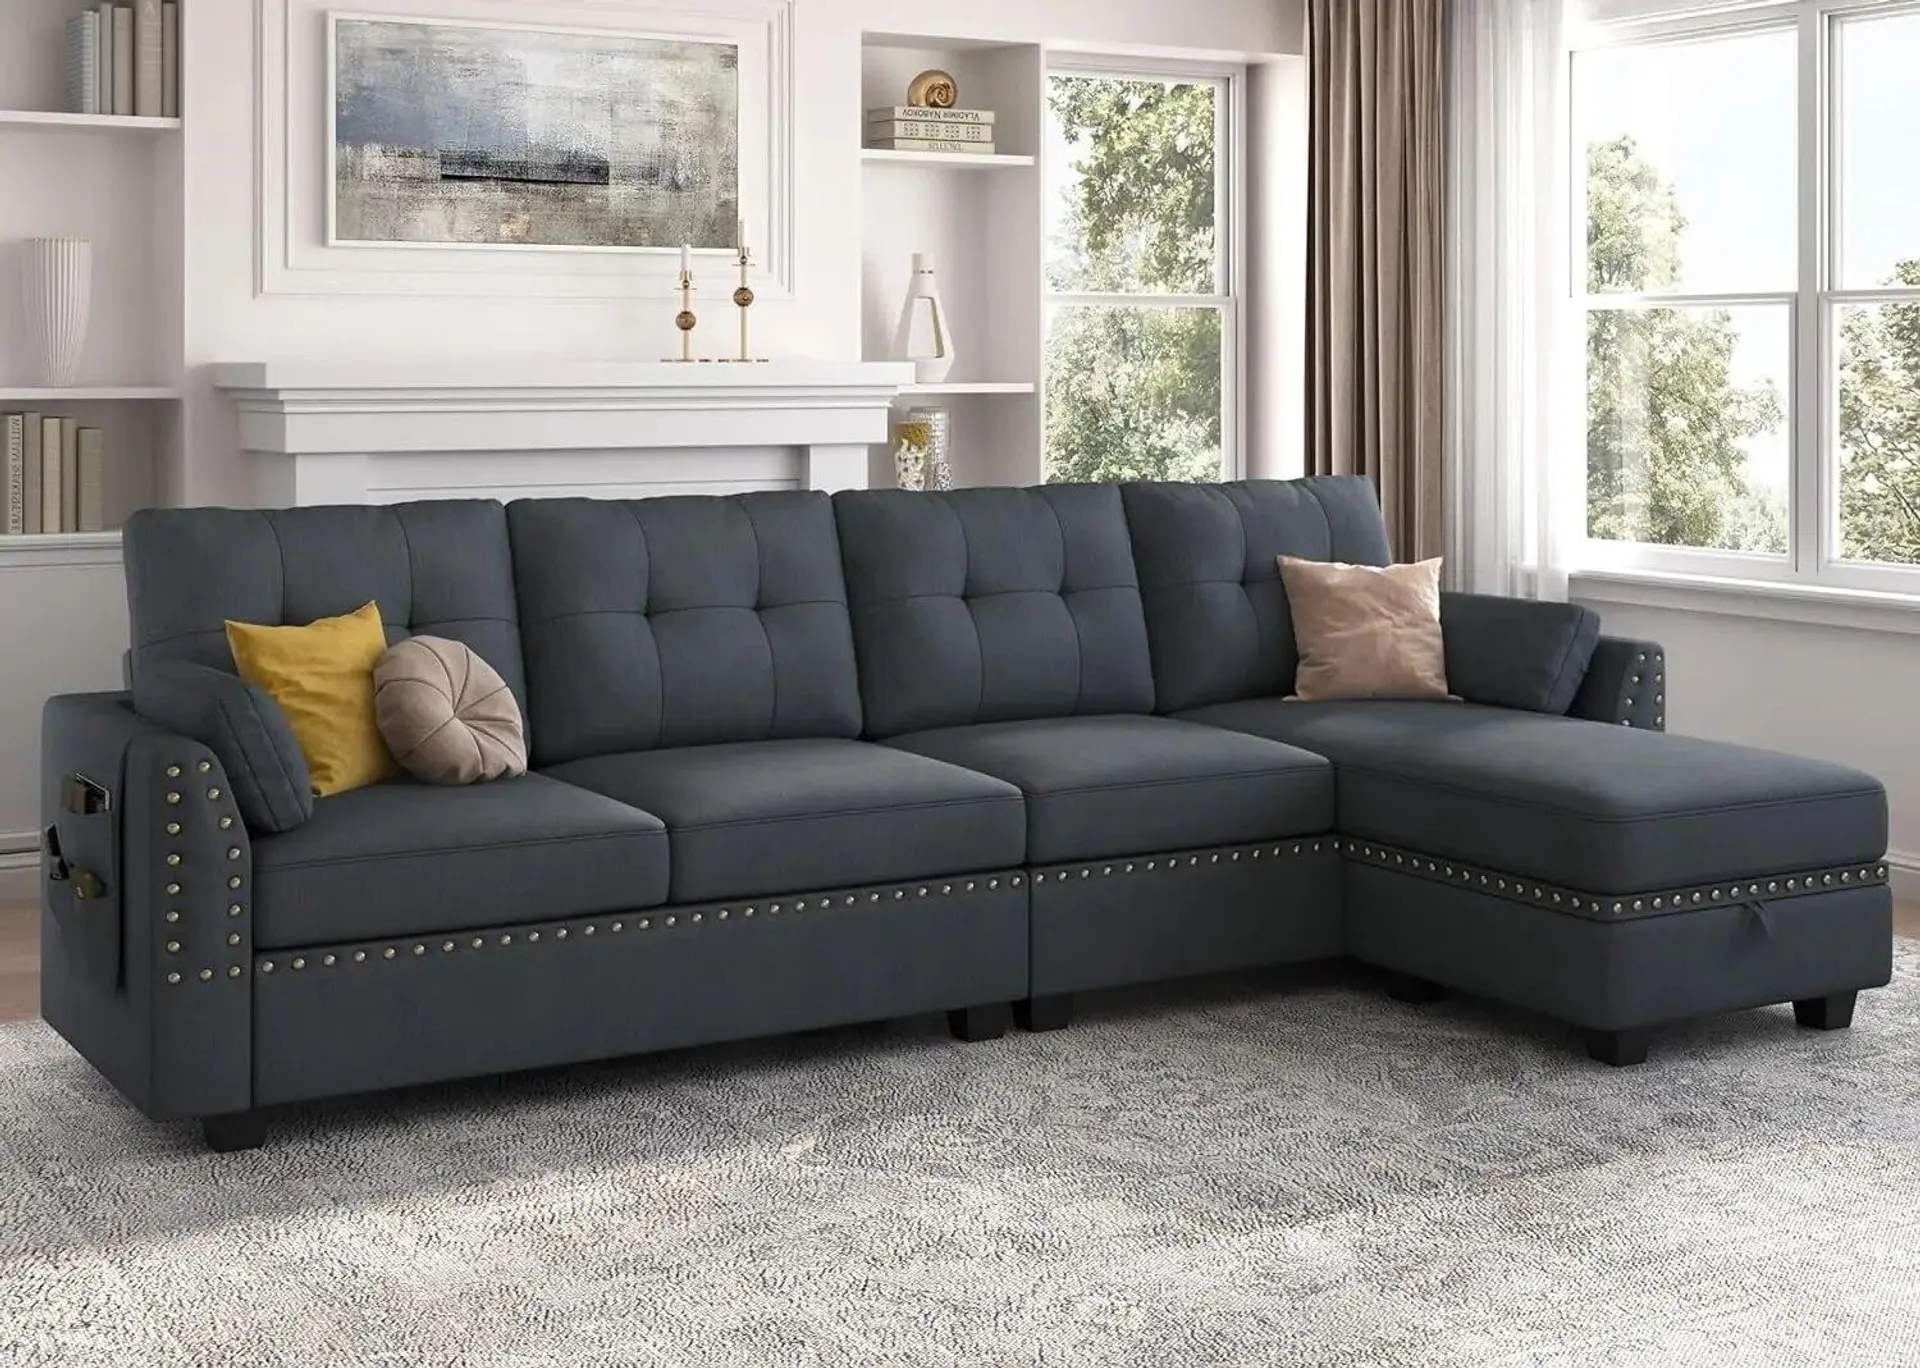 Convertible Sectional Sofa L Shaped Couch Reversible Sectional for Small Apartment